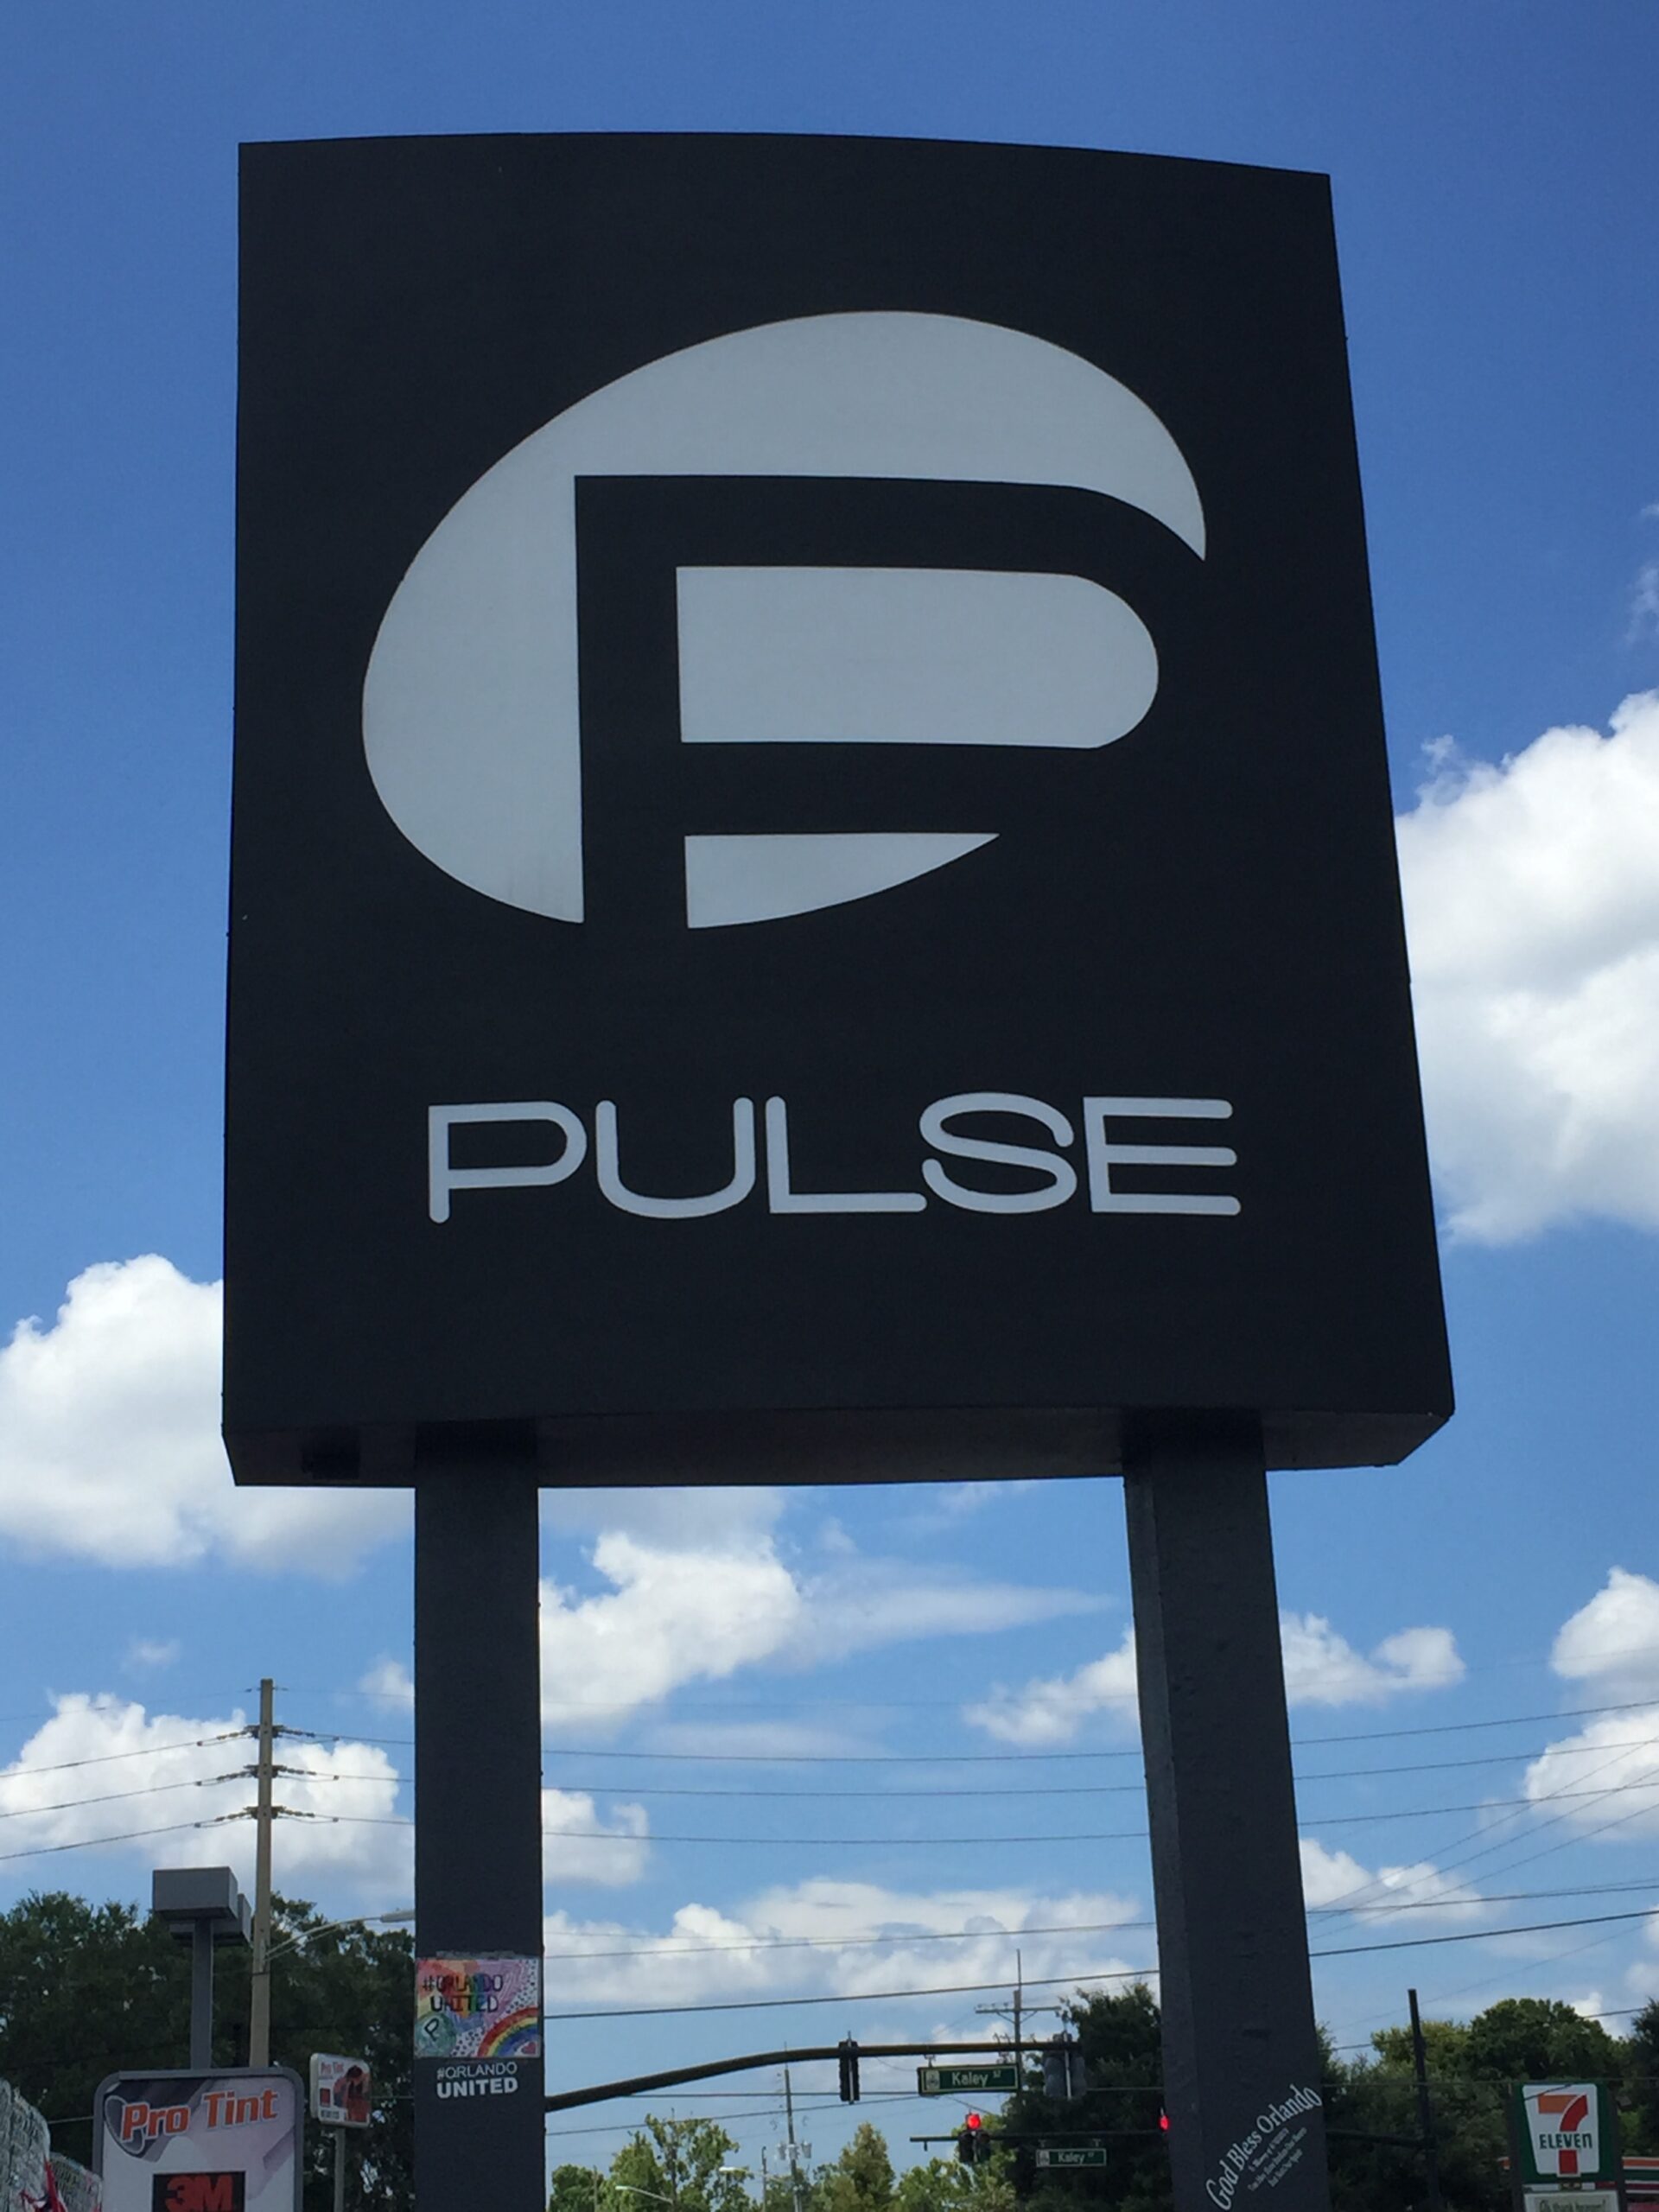 The Pulse Sign